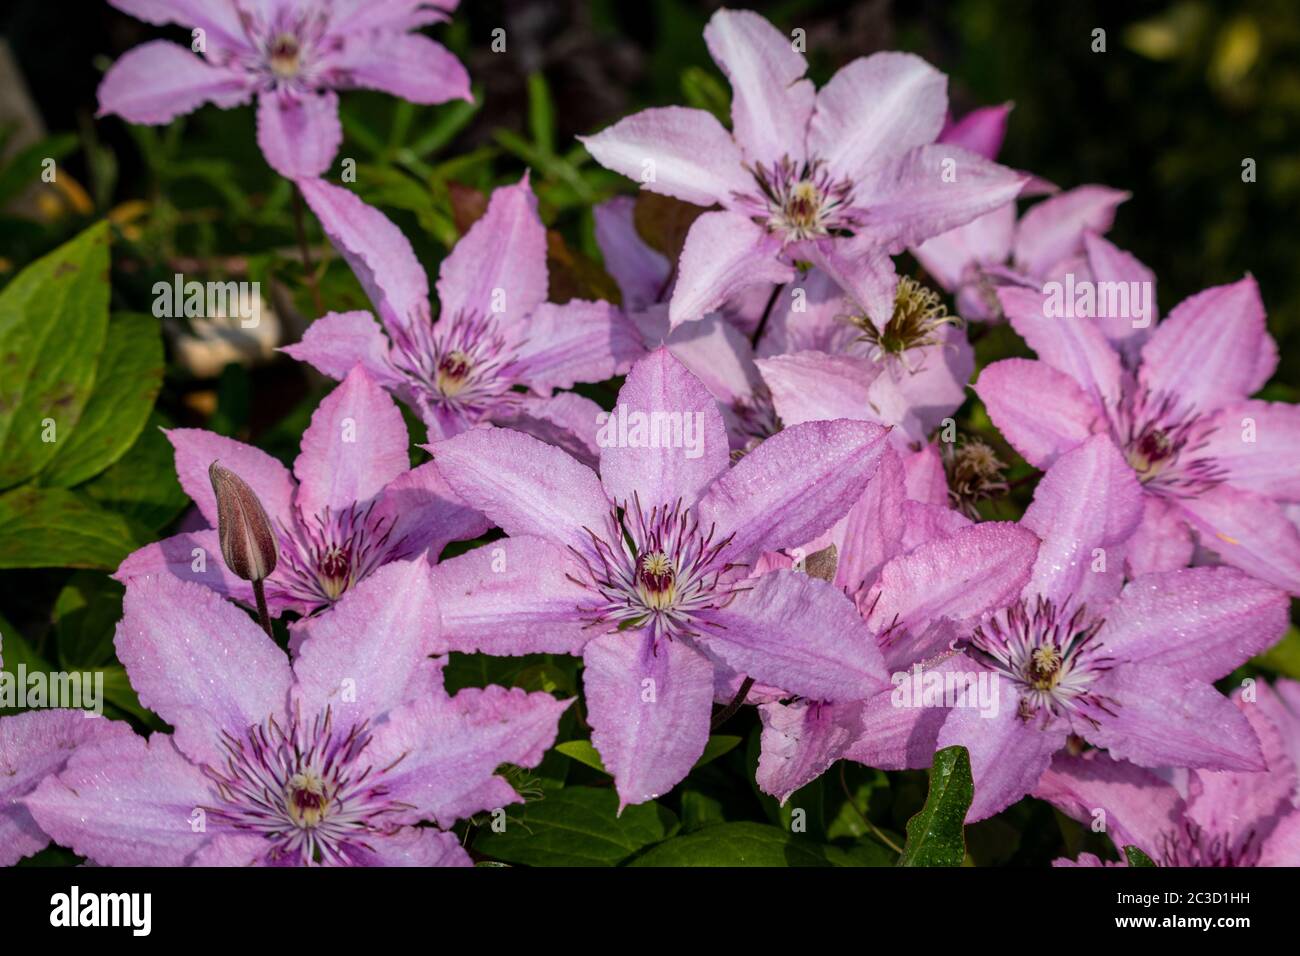 Clematis a beautiful climbing plant with beautiful large pink flowers, photo made in the Netherlands, province of Overijssel Stock Photo